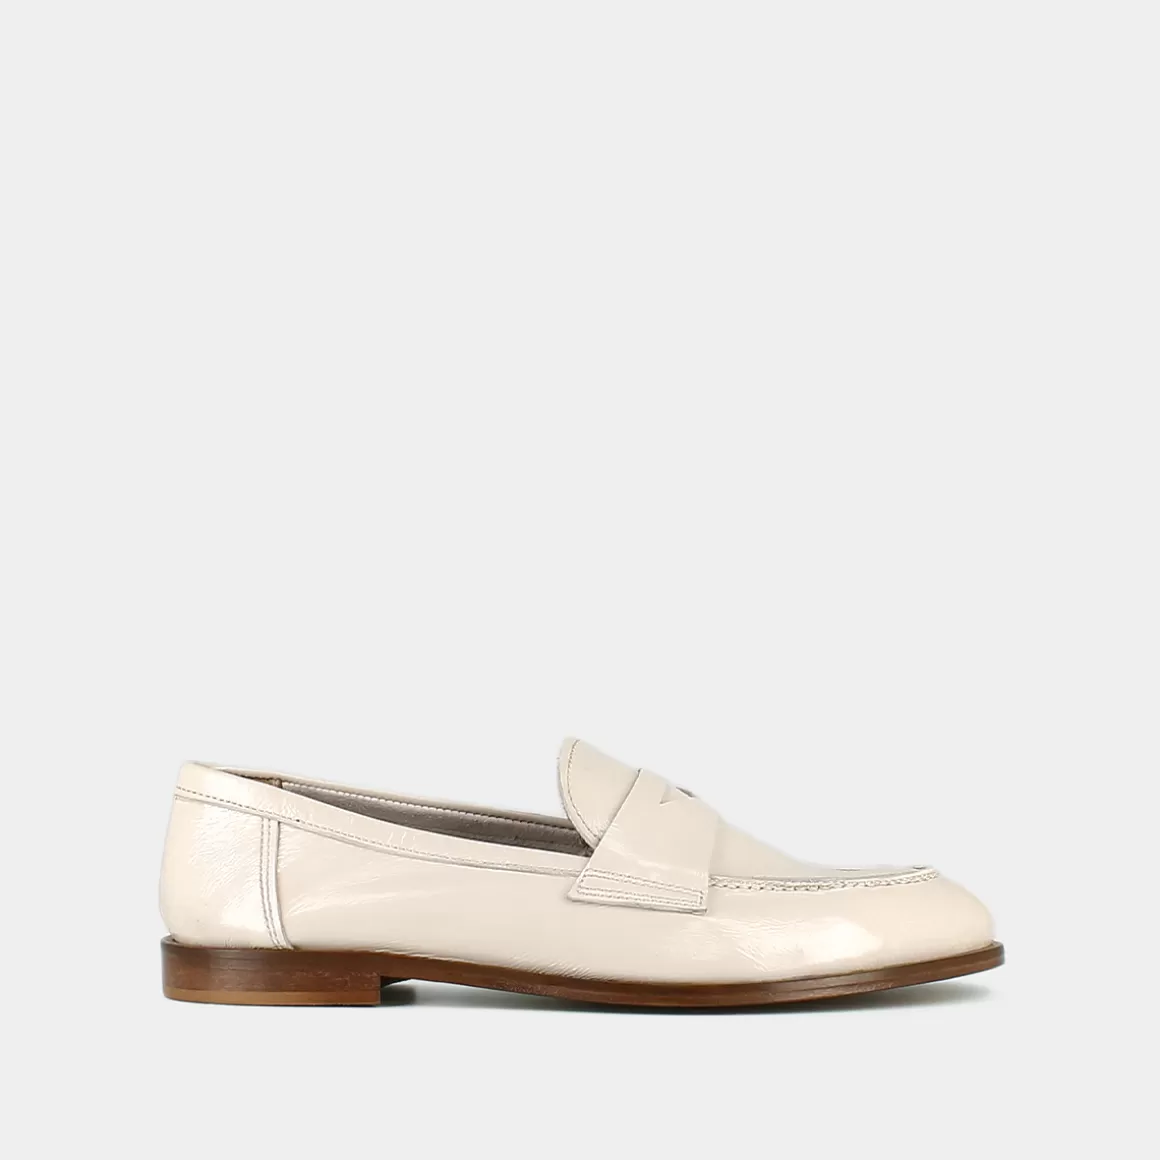 Closed toe and round loafers<Jonak Cheap